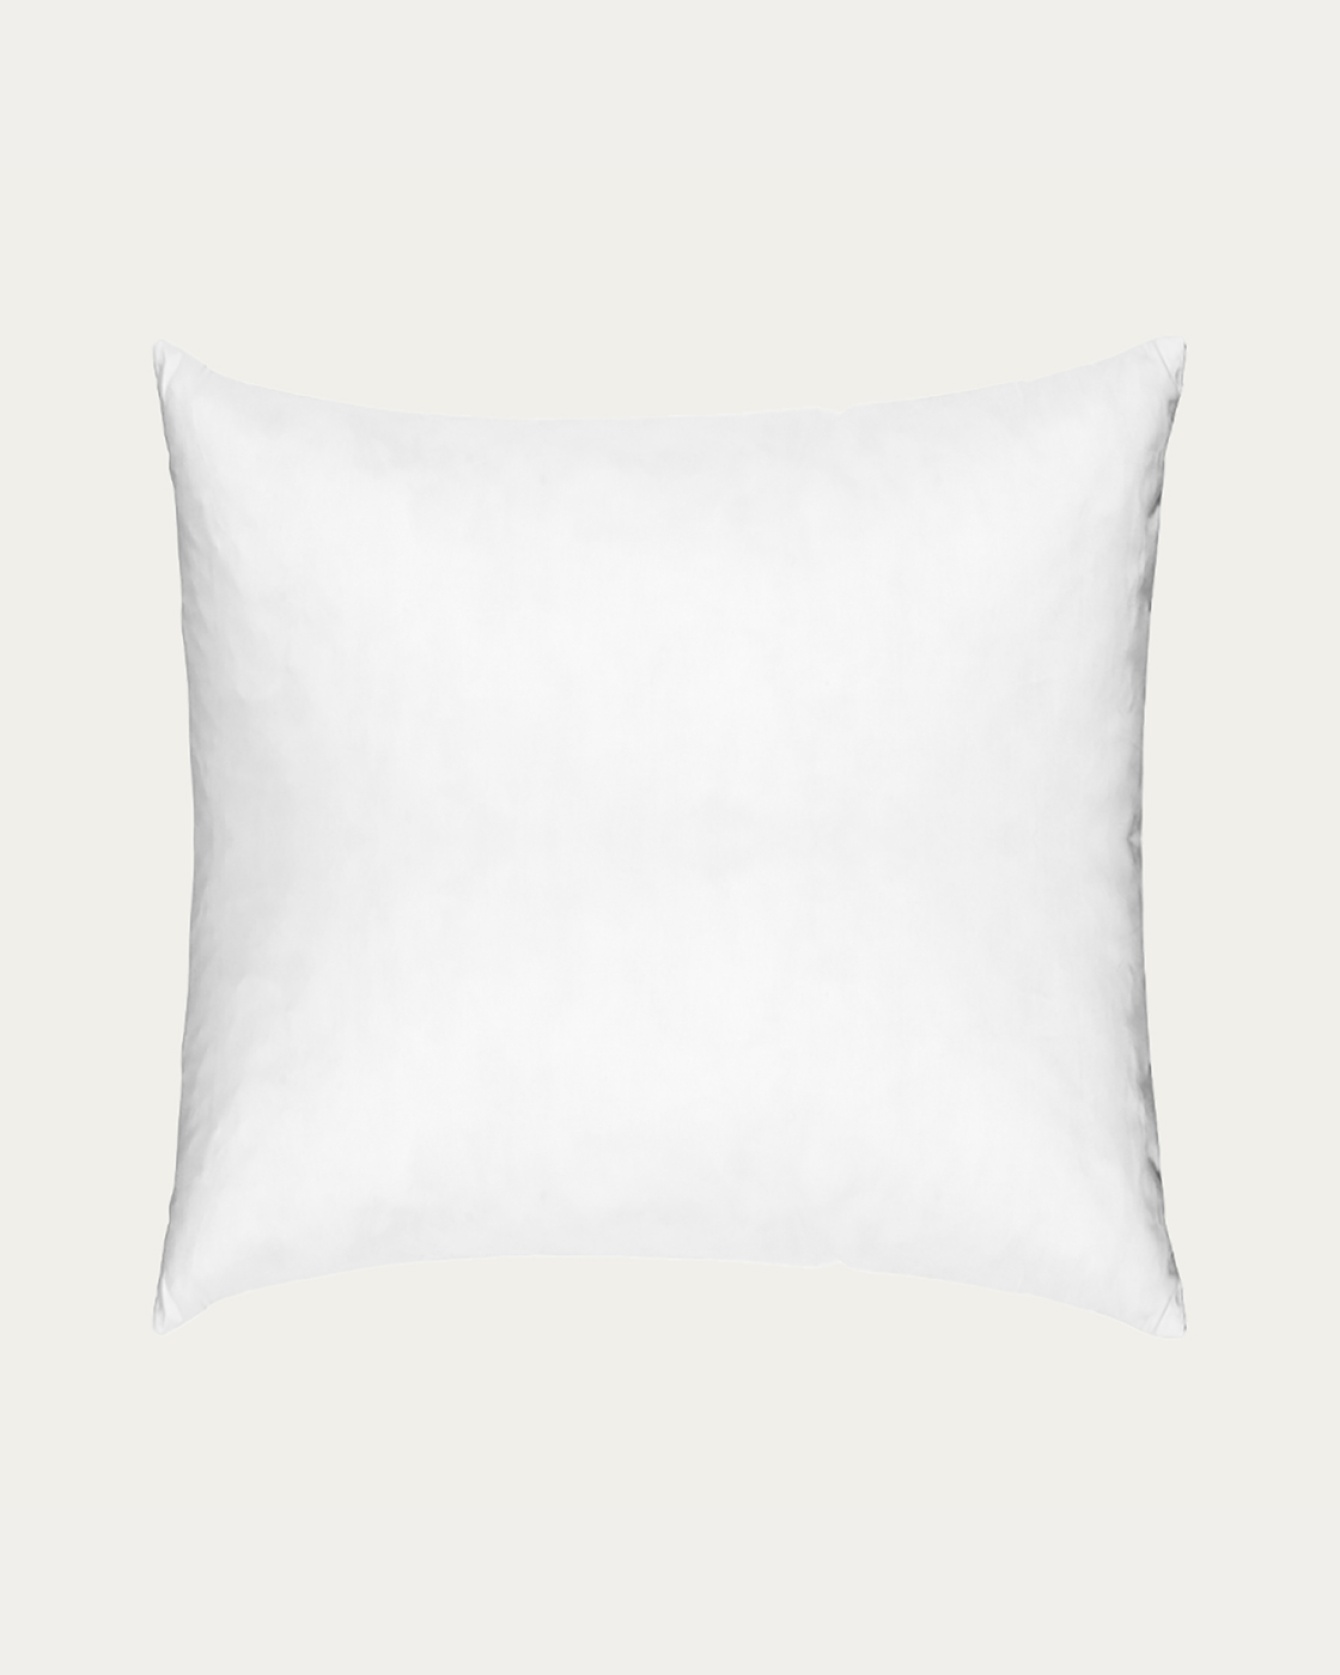 Product image white SYNTHETIC cushion insert made of cotton with polyester filling from LINUM DESIGN. Size 50x50 cm.